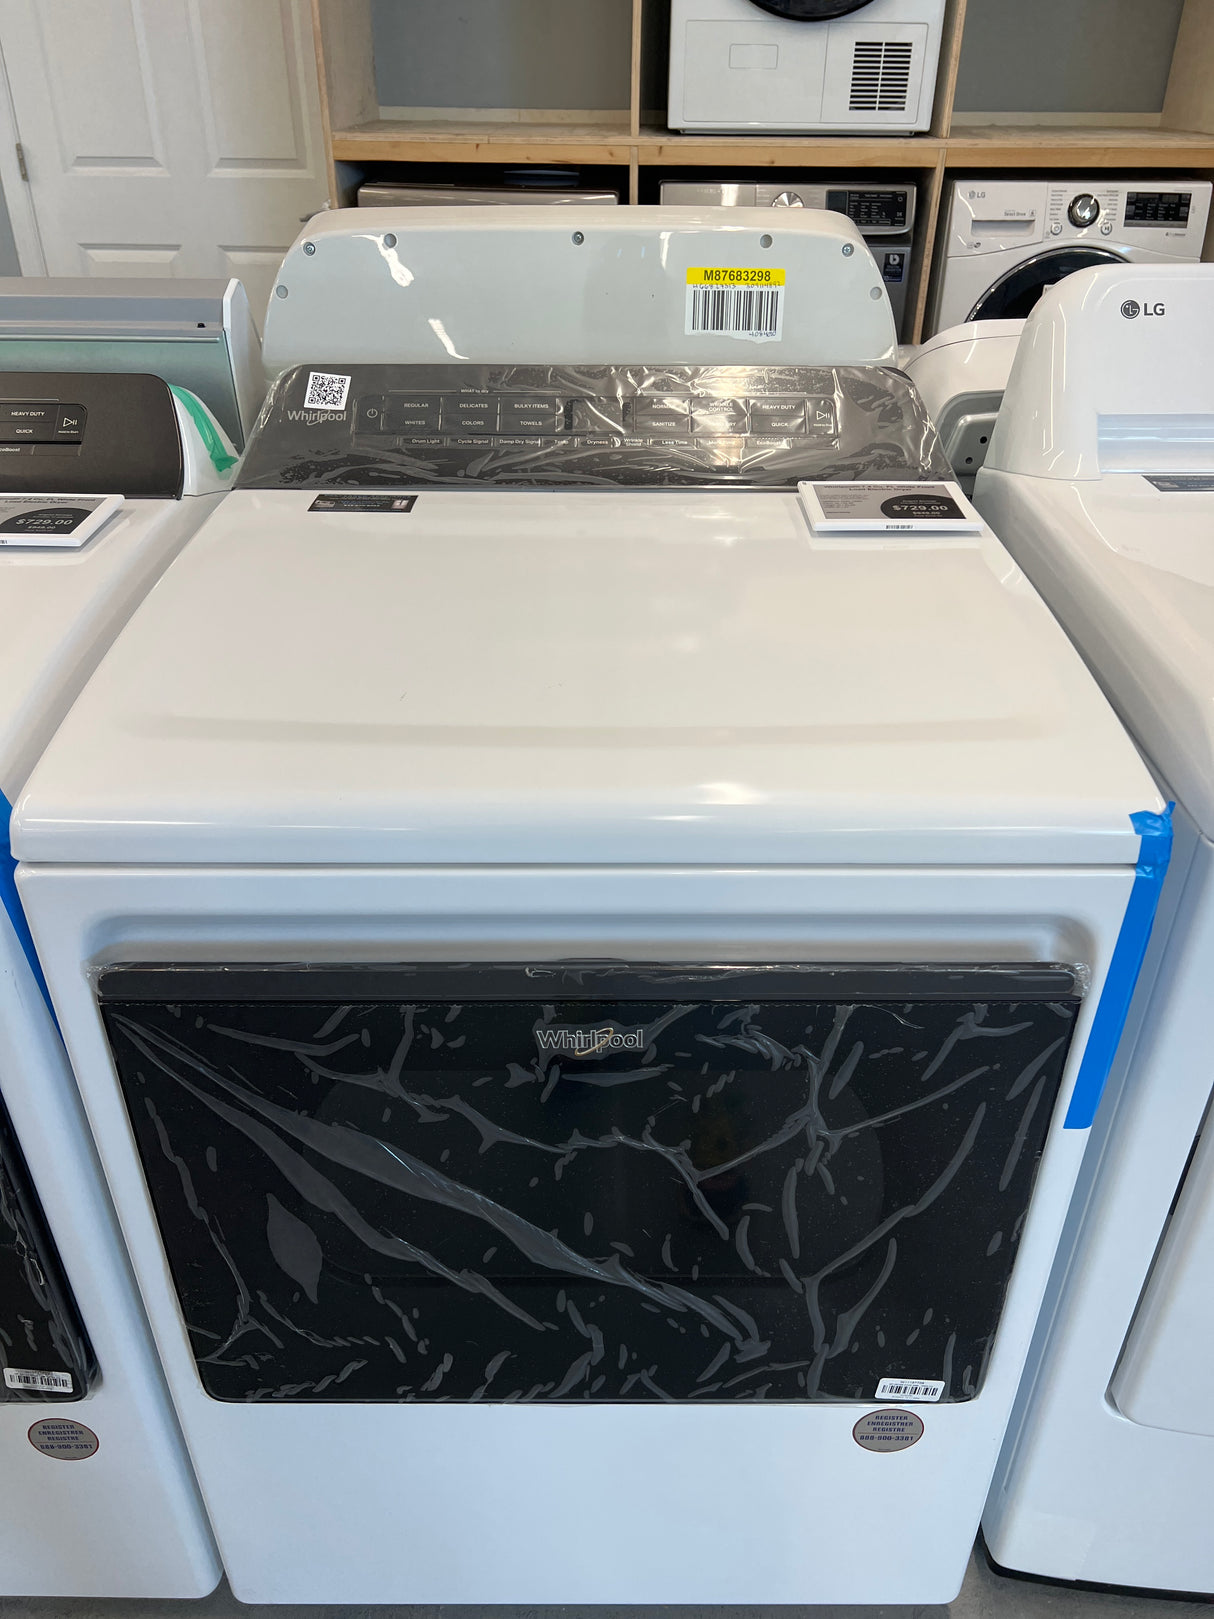 WED5100HW whirl, pool, 7.4 ft.³ white frontload electric dryer.